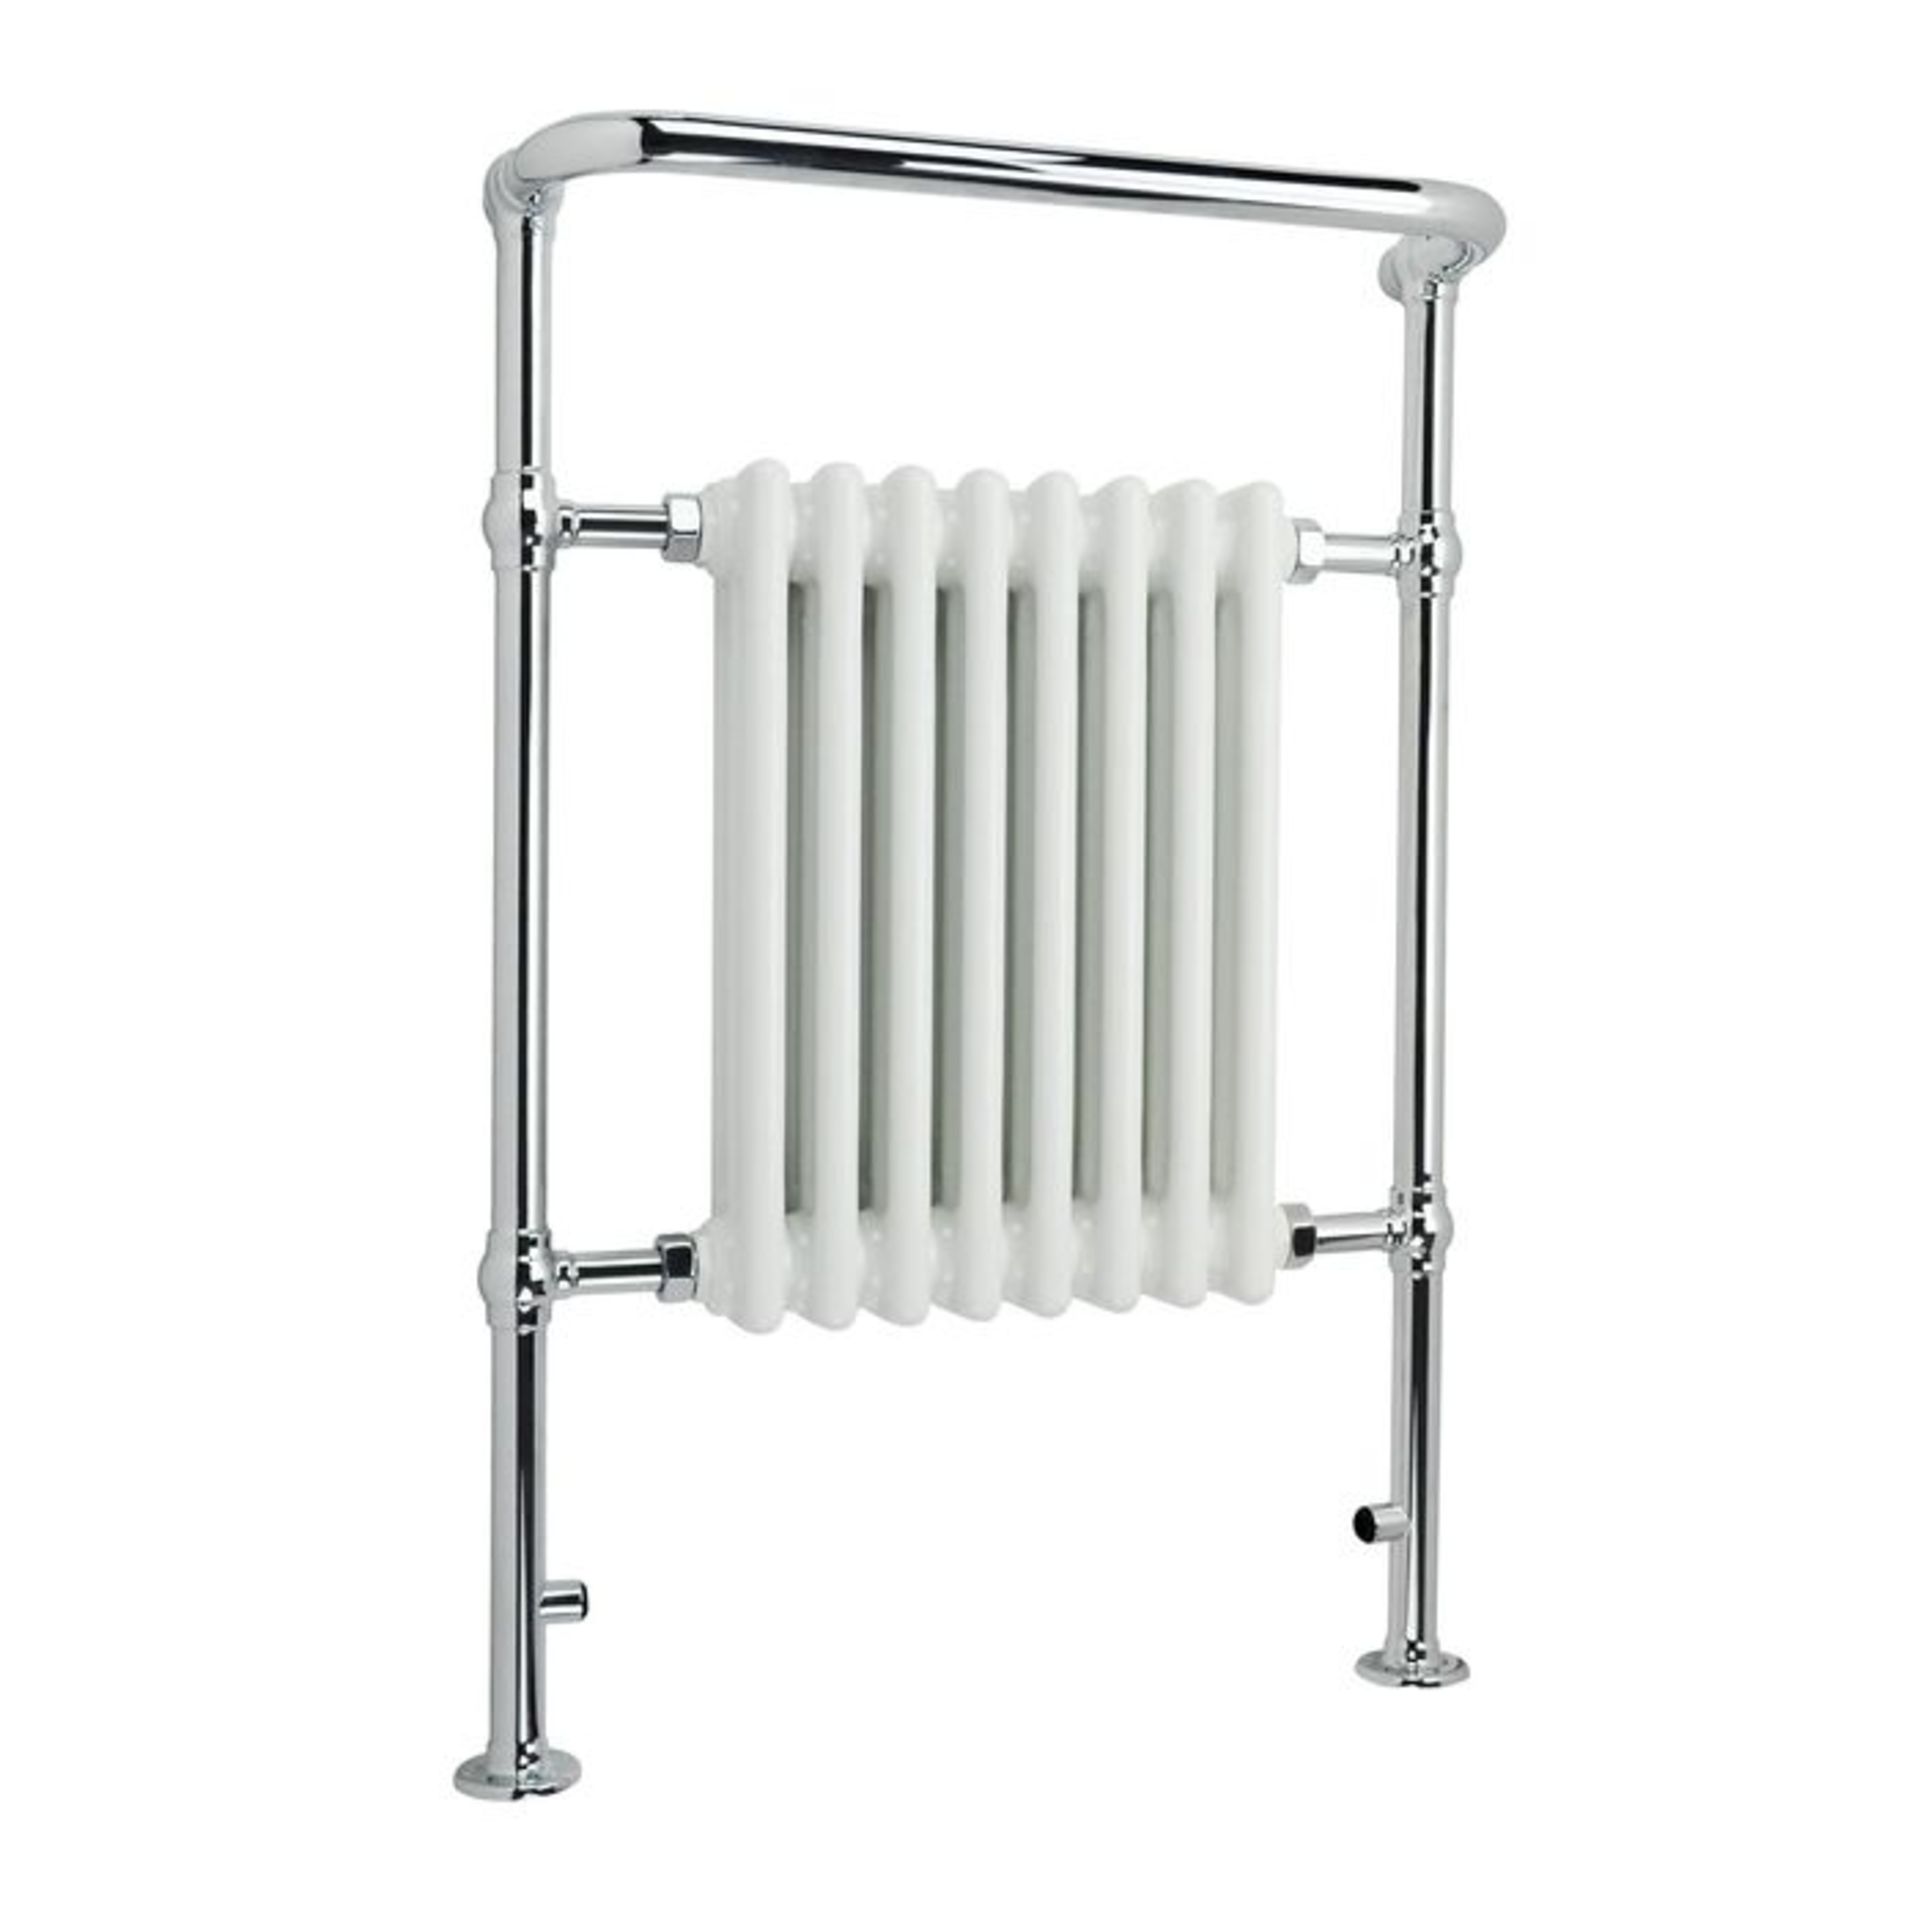 (Y121) 952x659mm Large Traditional White Towel Rail - Cambridge. £341.99. Complies with ISO9001:2008 - Image 2 of 5